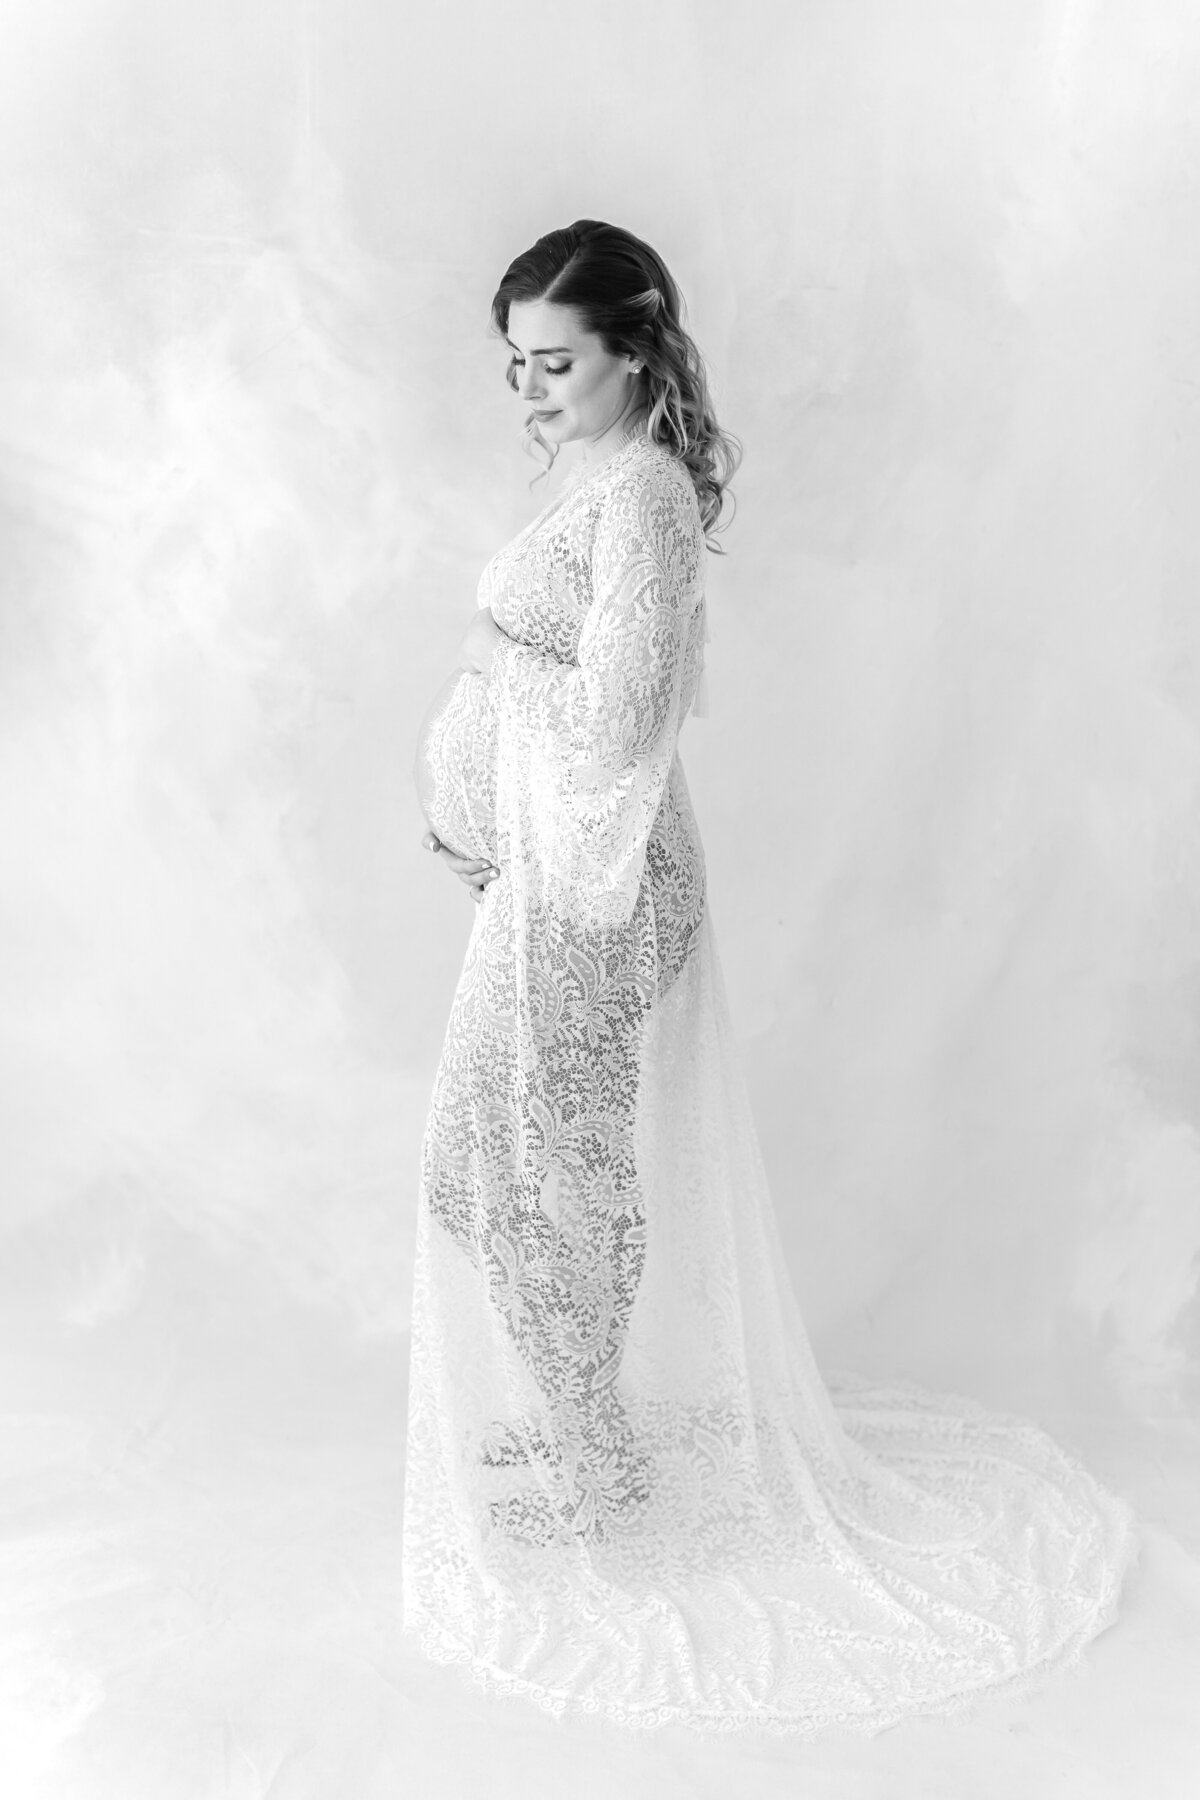 A dc maternity photographer black and white photo of a pregnant mama looking down at her belly in a lace boudoir gown